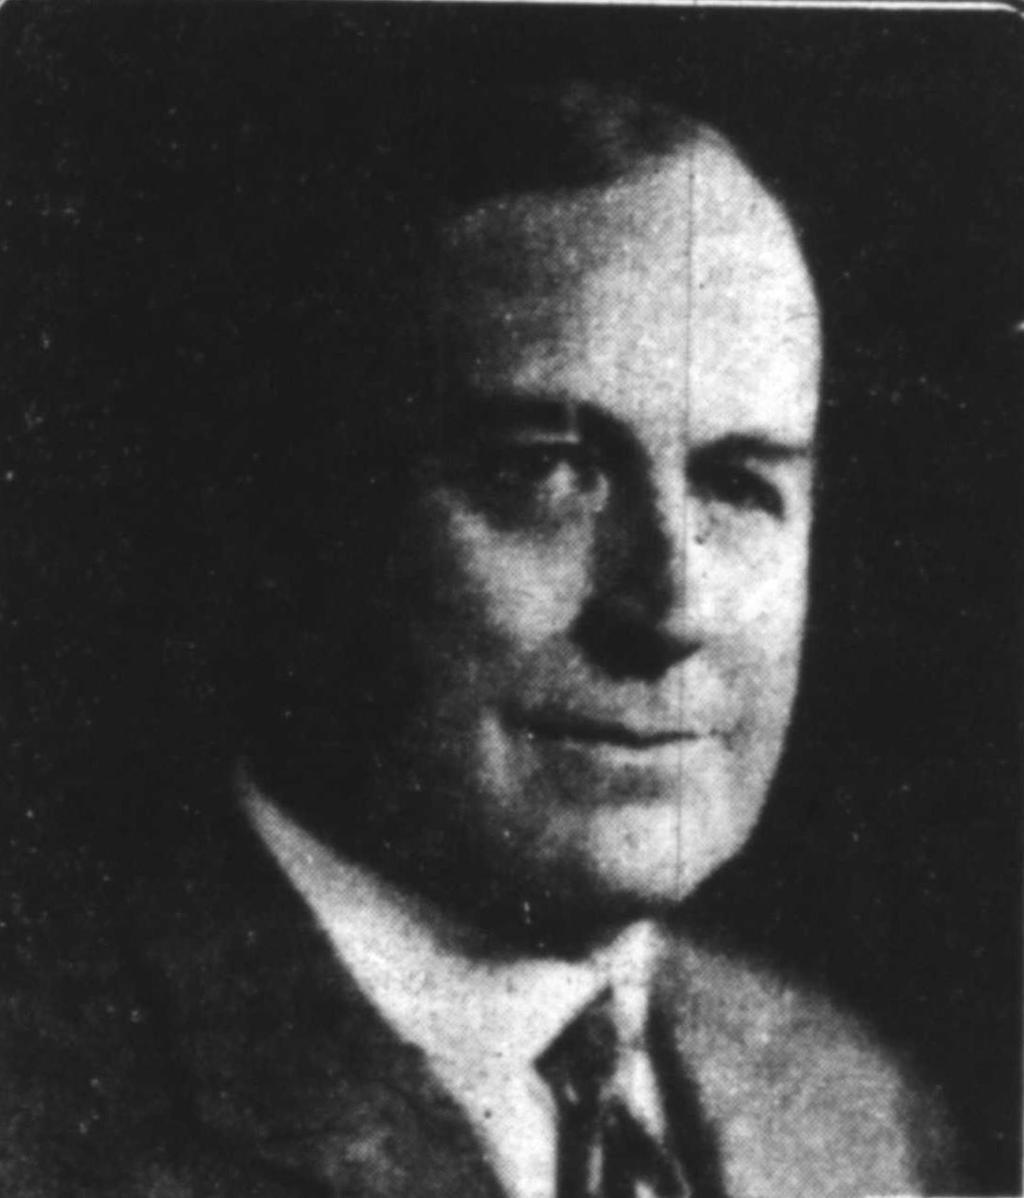 Carroll Phenicie, Vice President and General Manager at WPS, was a founding member of the Rotary Club of Green Bay. Having begun his career in Chicago, Mr.